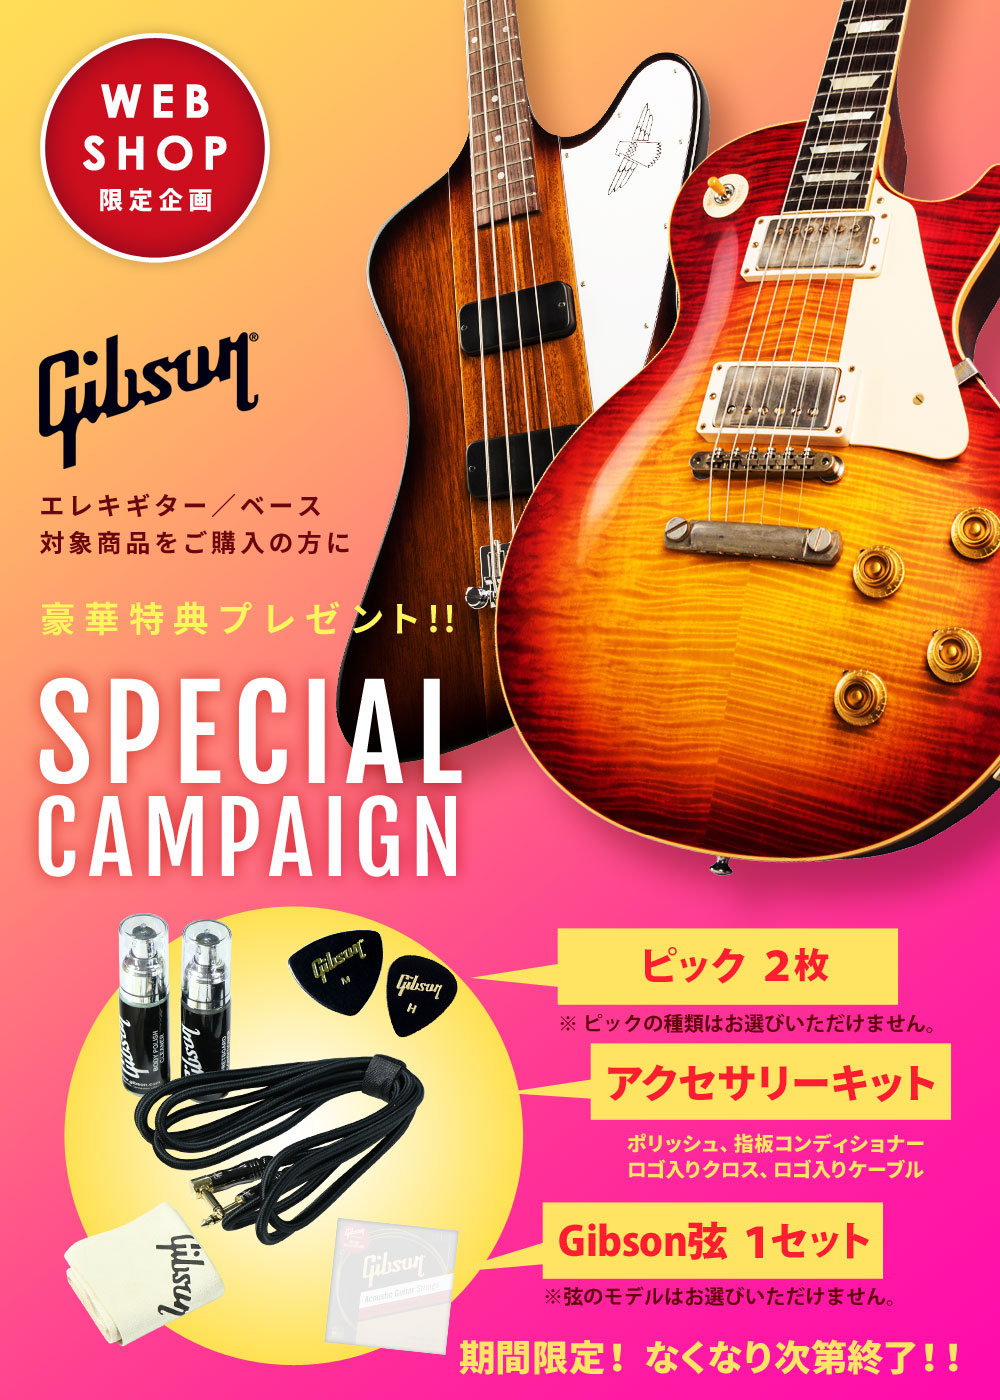 Gibson SPECIAL CAMPAIGN【イシバシ楽器】